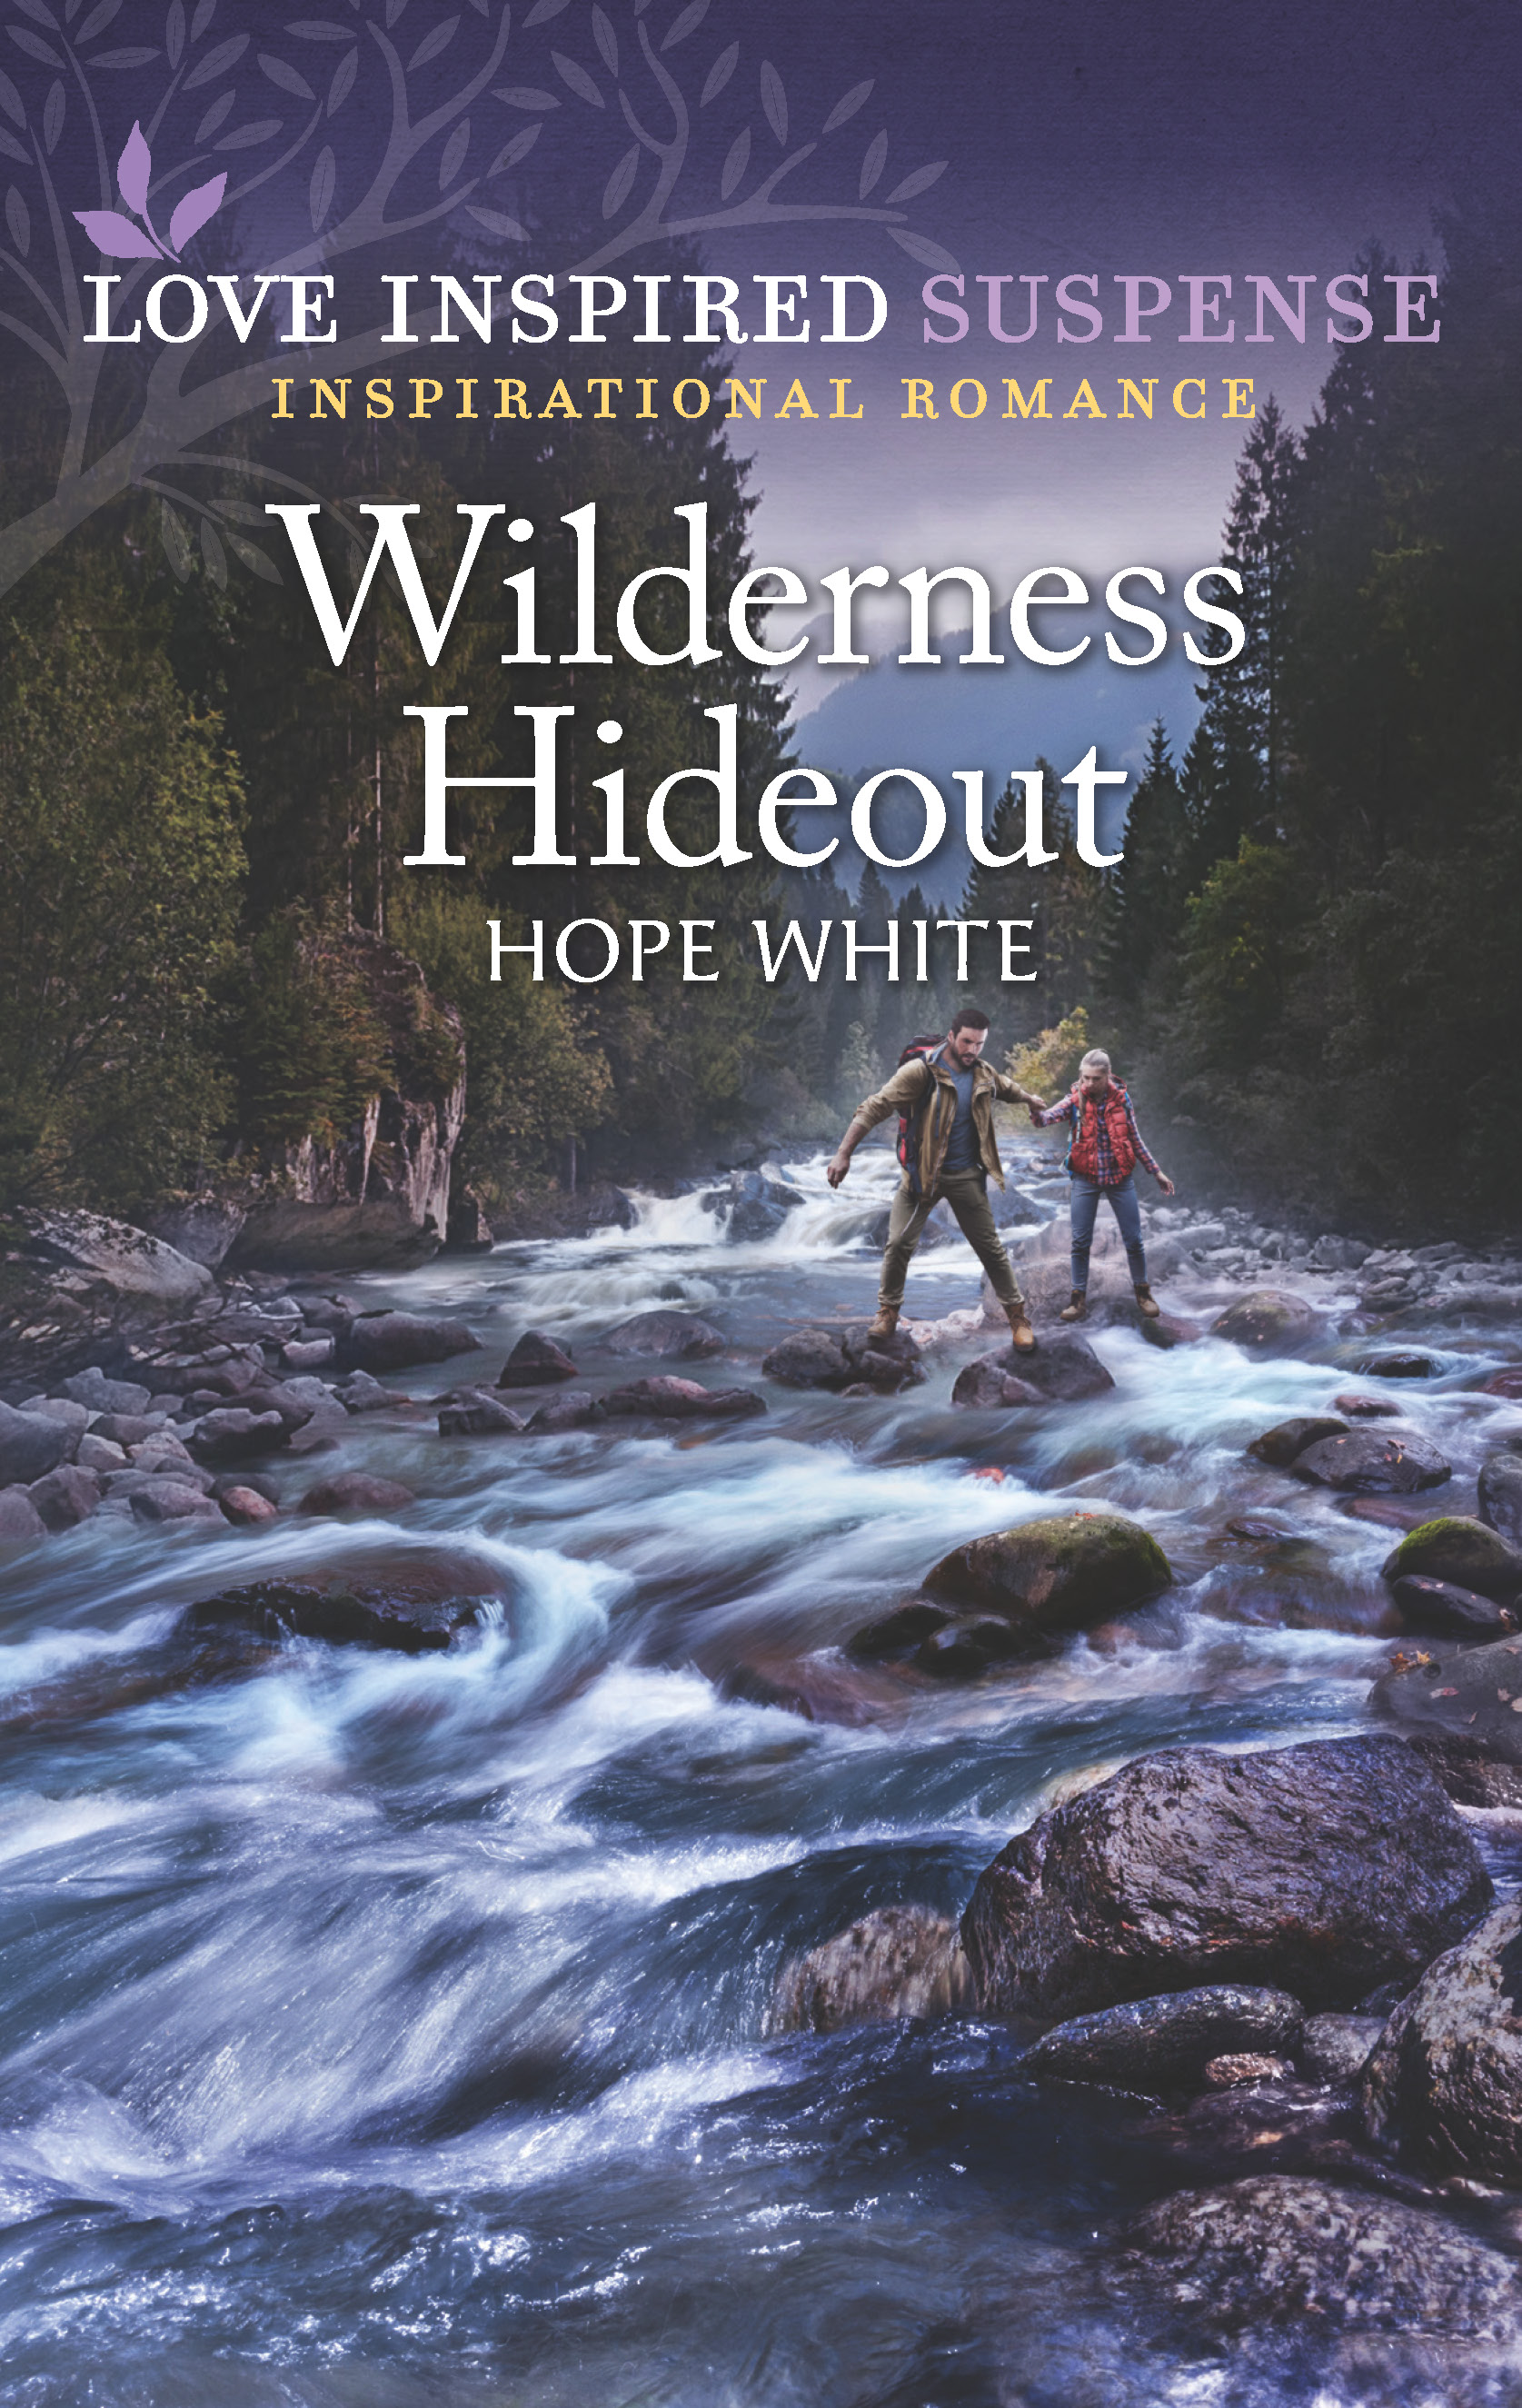 Wilderness Hideout by Hope White